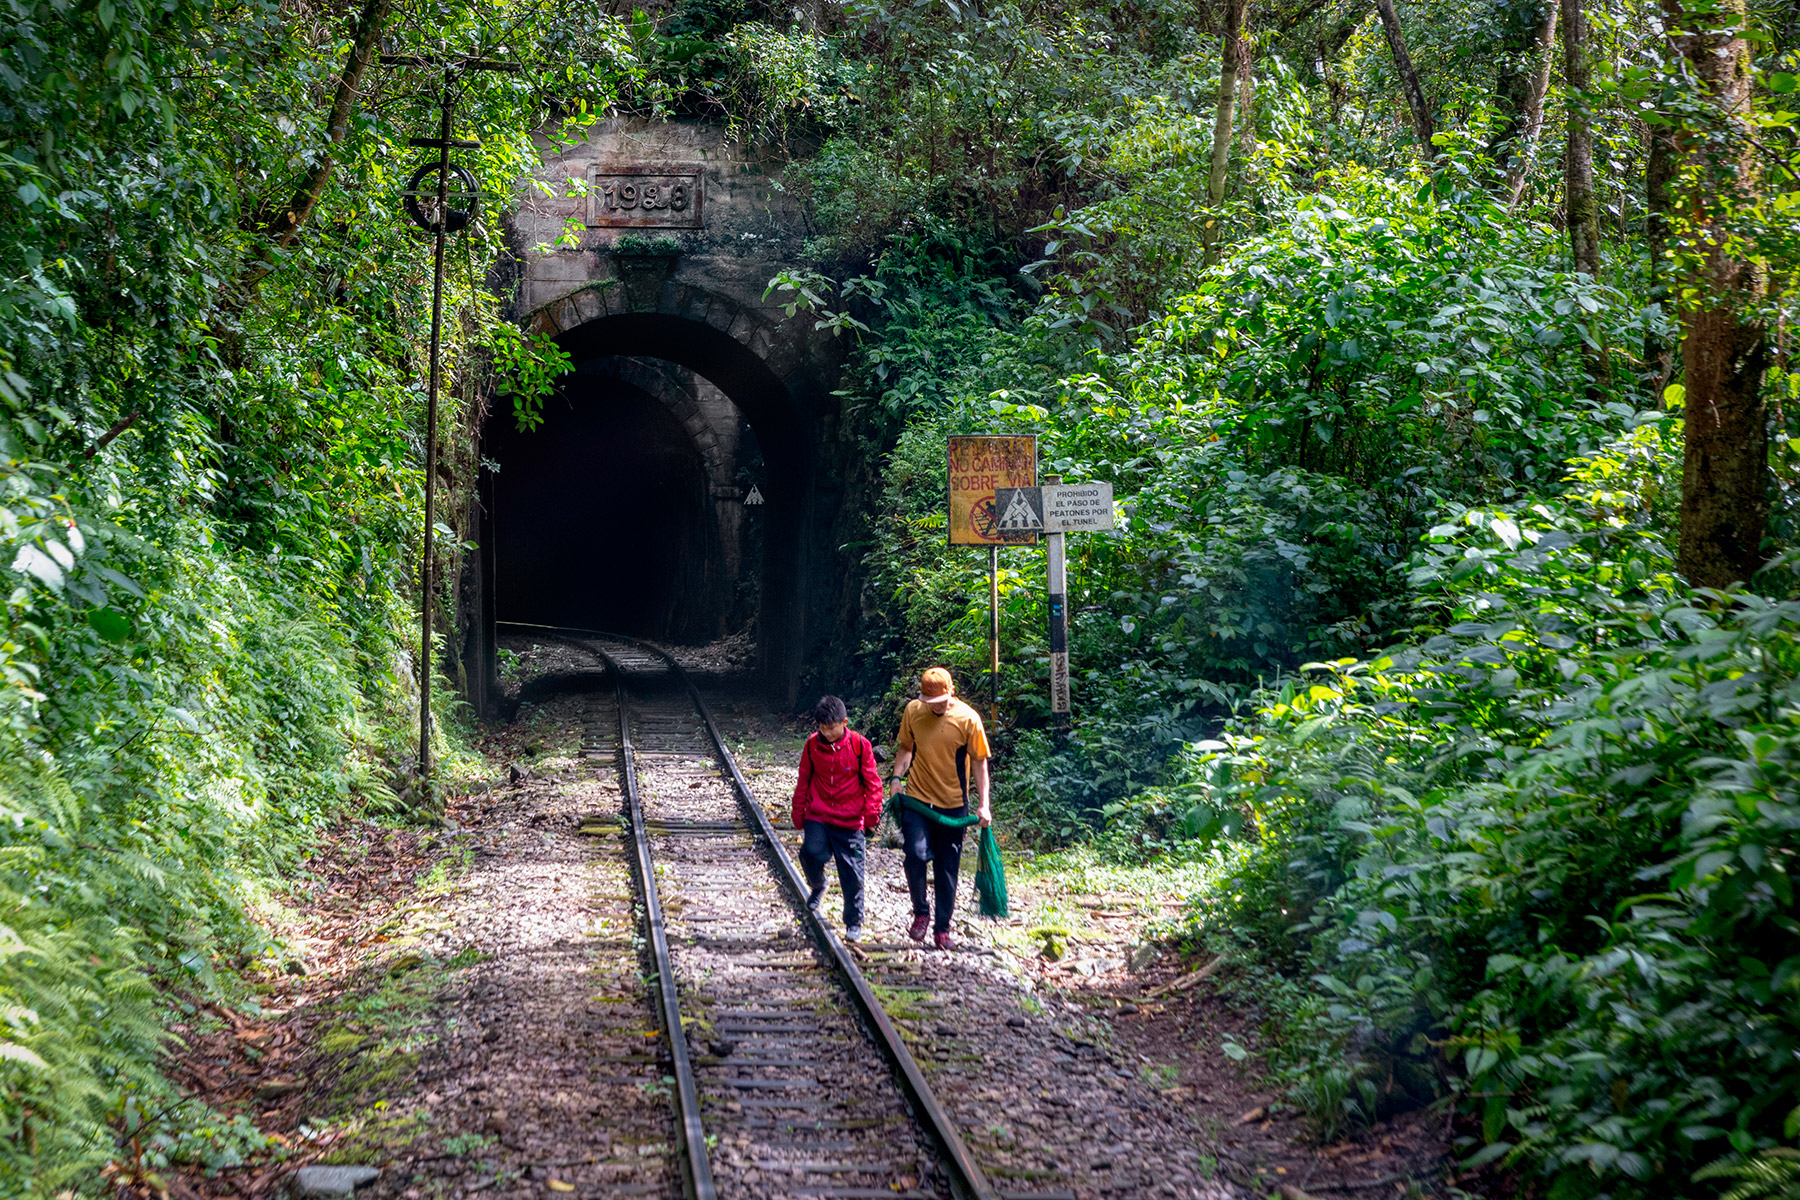 A tunnel is marked with the date 1928 - this part of the line opened a year later, in 1929.